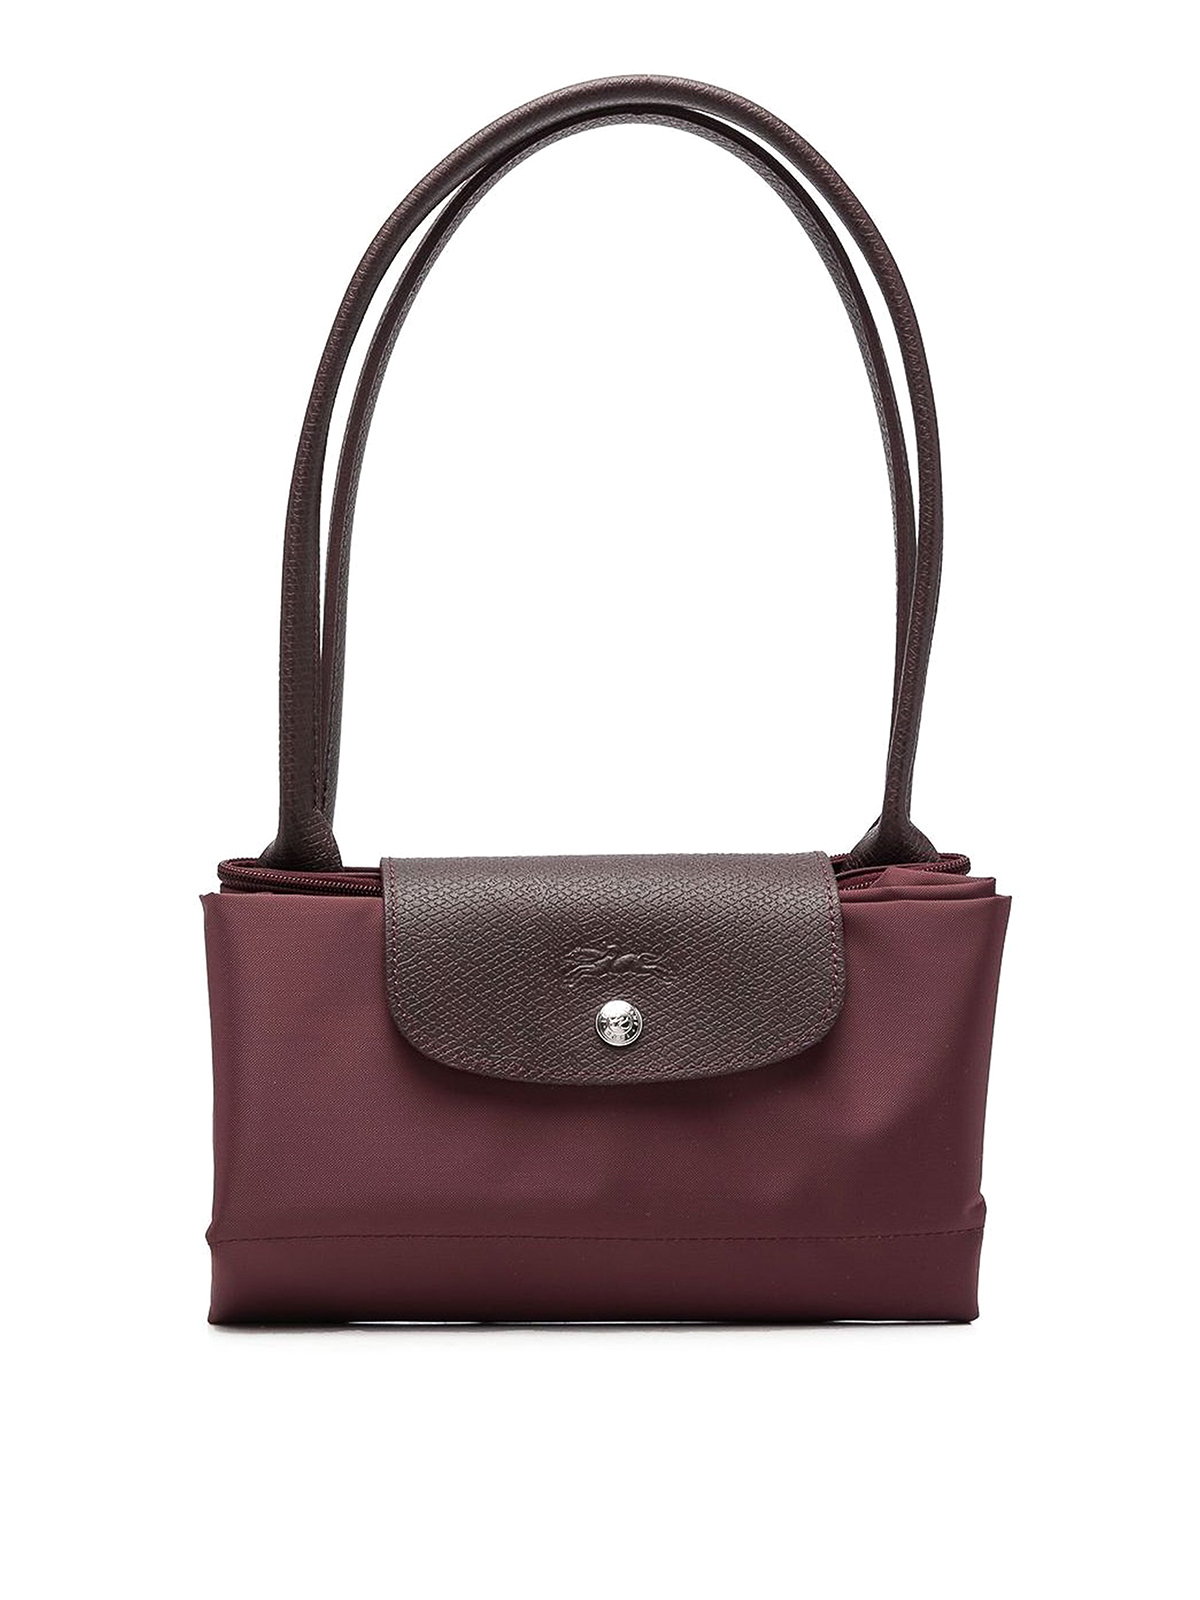 Astrolabe disk Exert Totes bags Longchamp - Canvas tote - L1899919009 | thebs.com [ikrix.com]